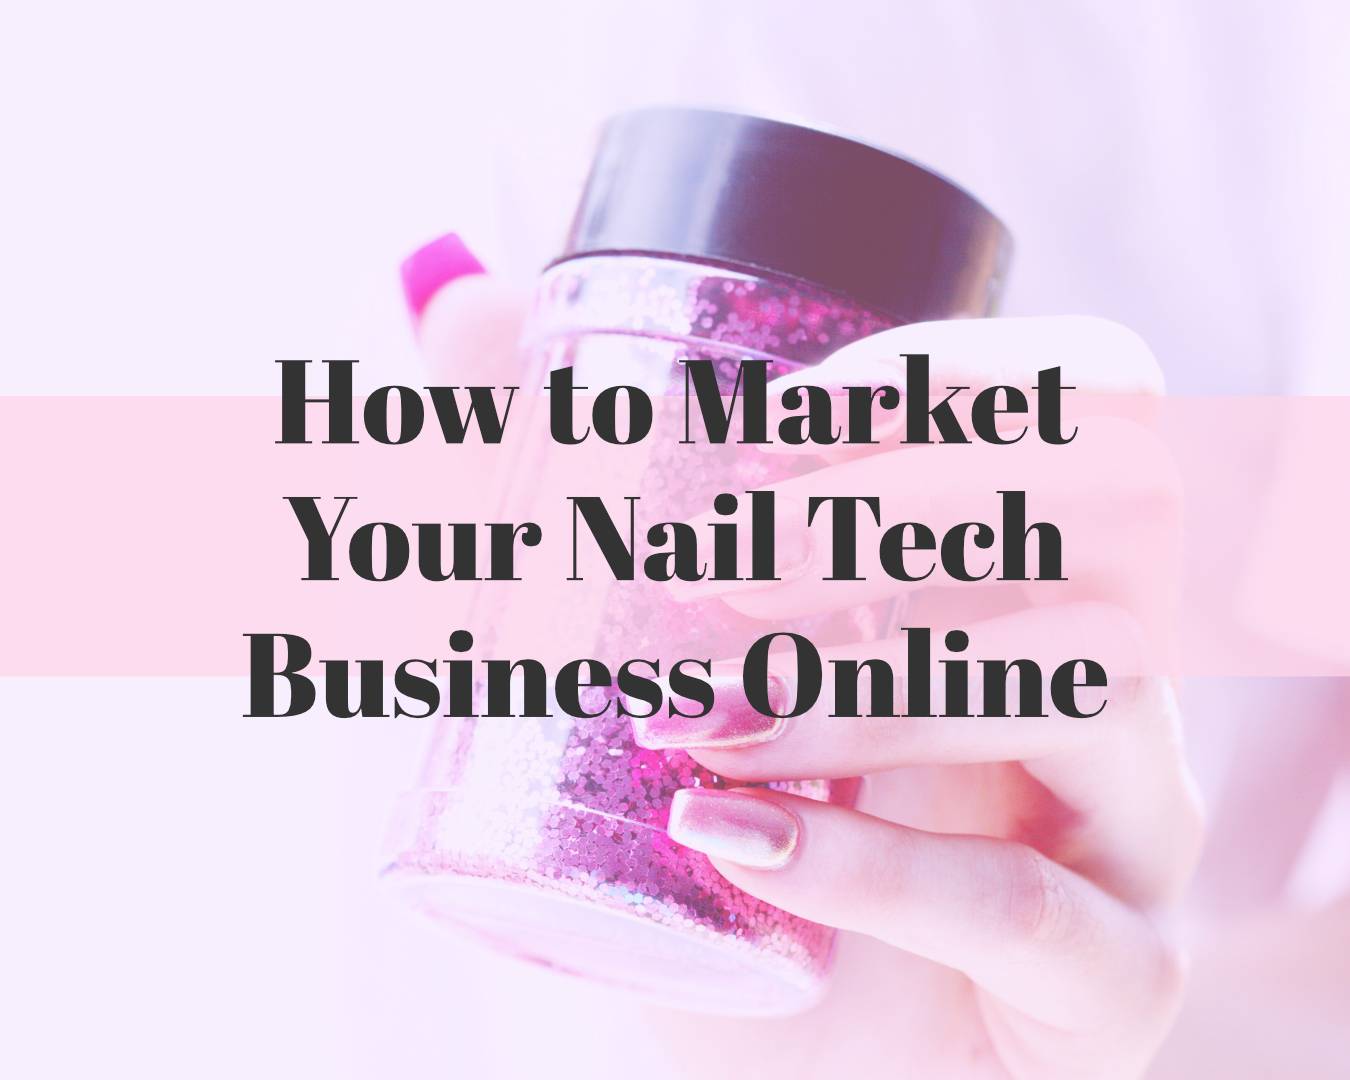 7. How to Market Yourself as a Nail Artist and Attract Clients - wide 6